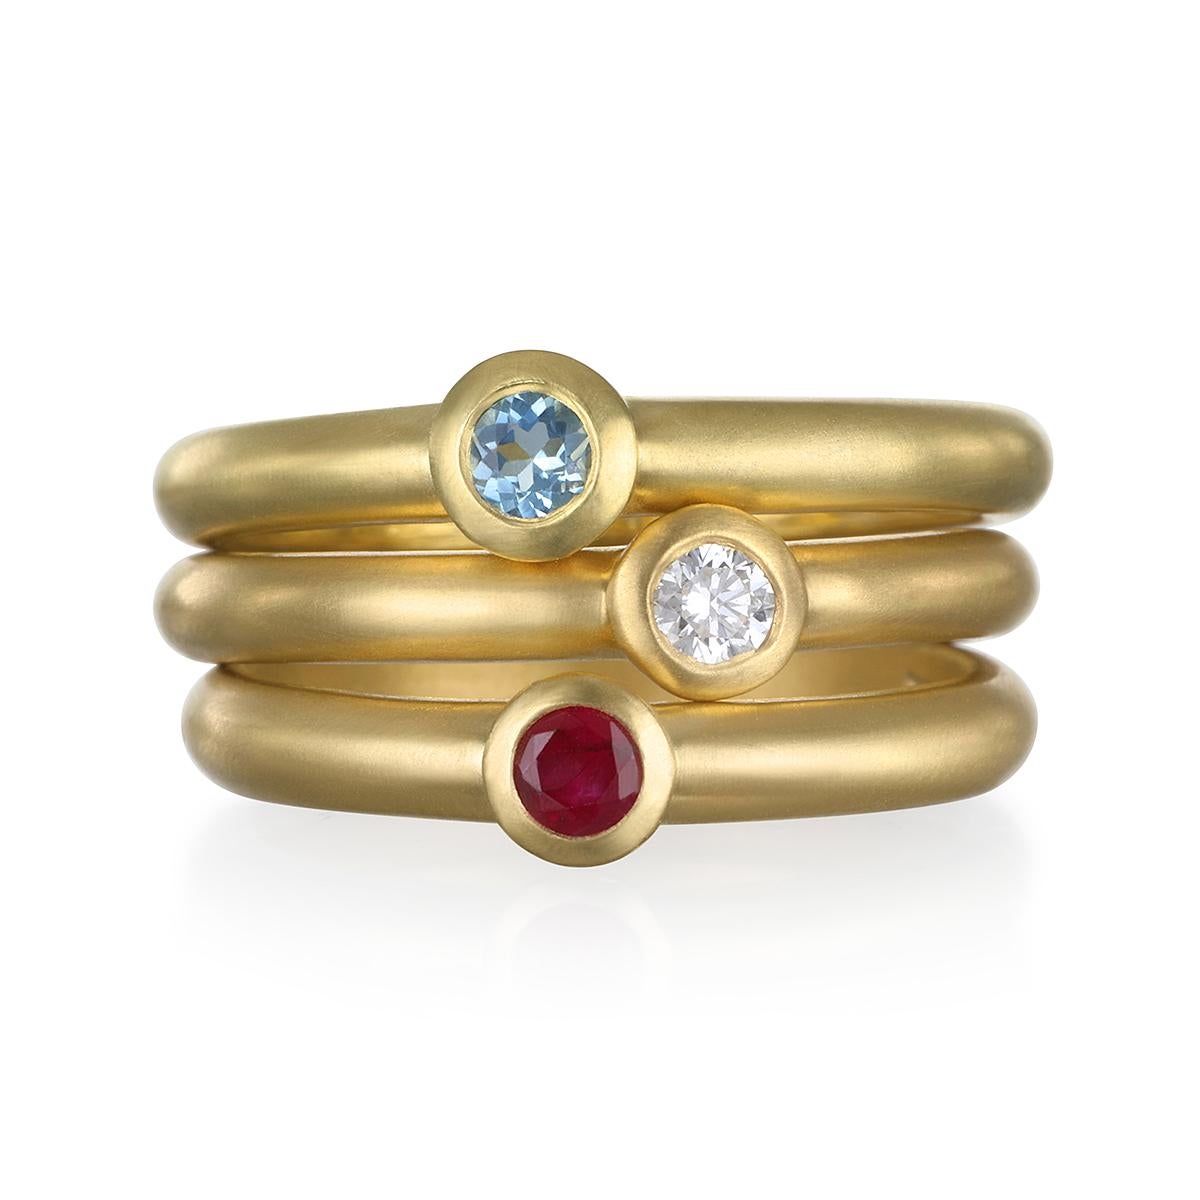 The perfect bright, and simple diamond solitaire stack ring. Beautifully crafted, bezel set and matte-finished.  Wear alone or stacked with other rings to elevate your individual style!

Handcrafted in 18k green gold, Faye Kim’s modern design